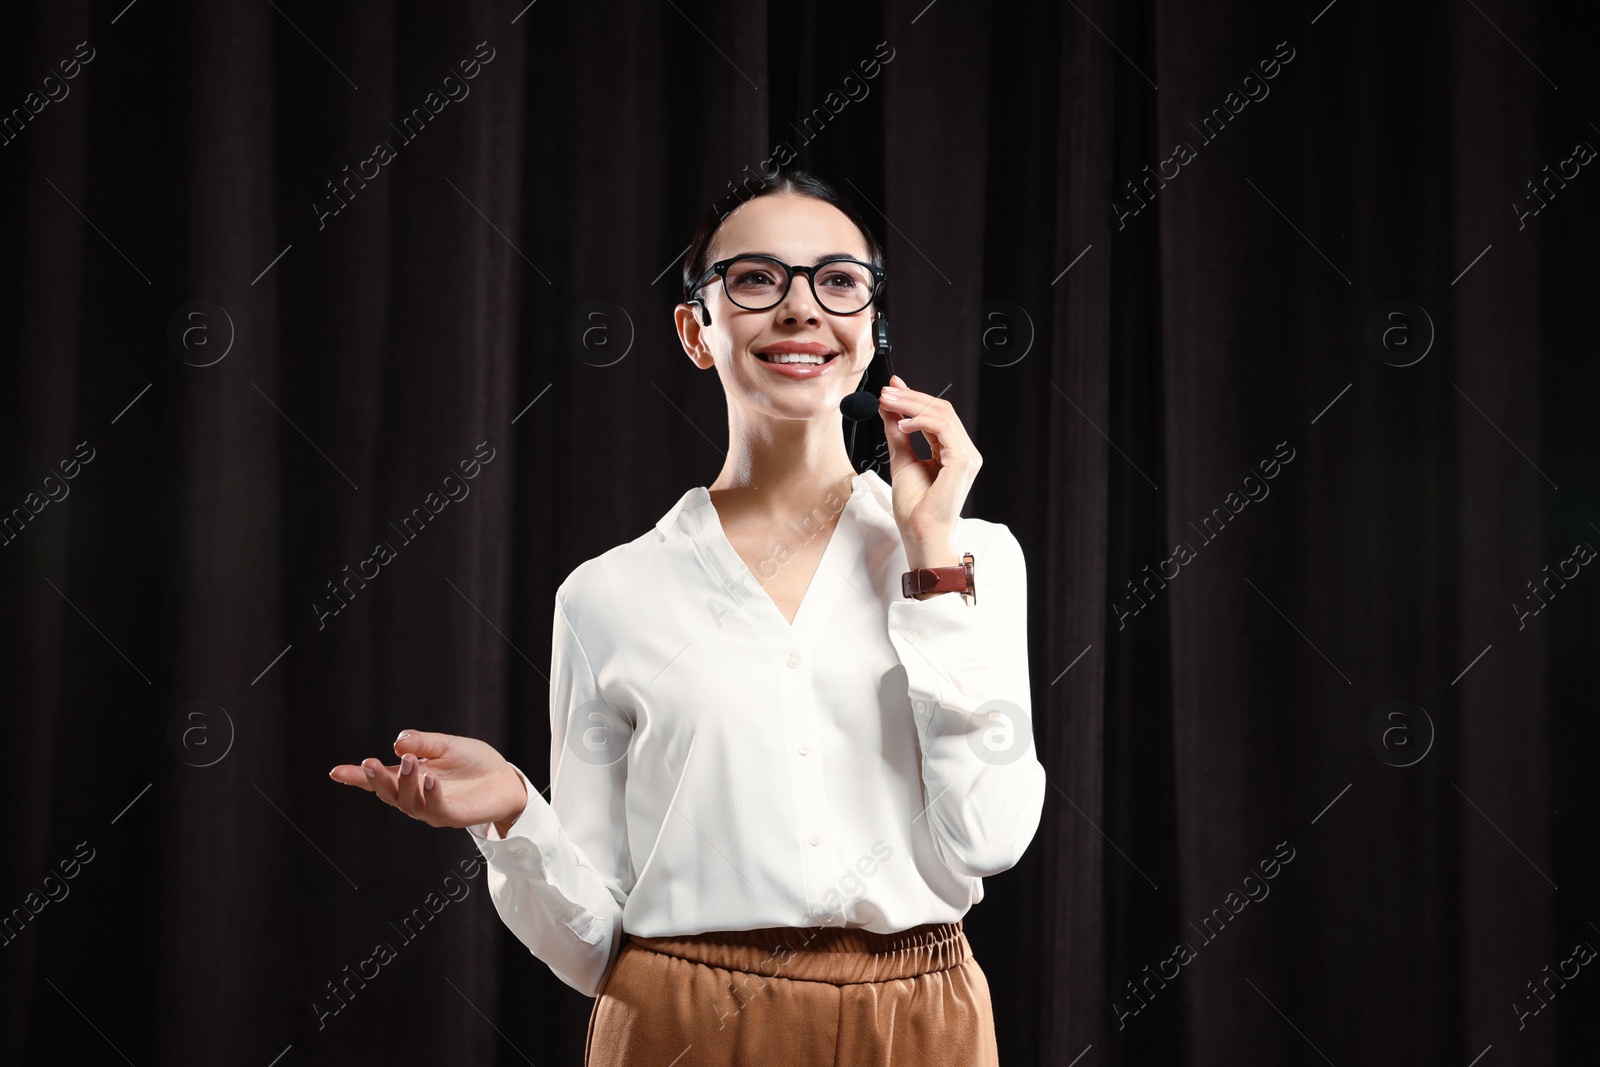 Photo of Motivational speaker with headset performing on stage